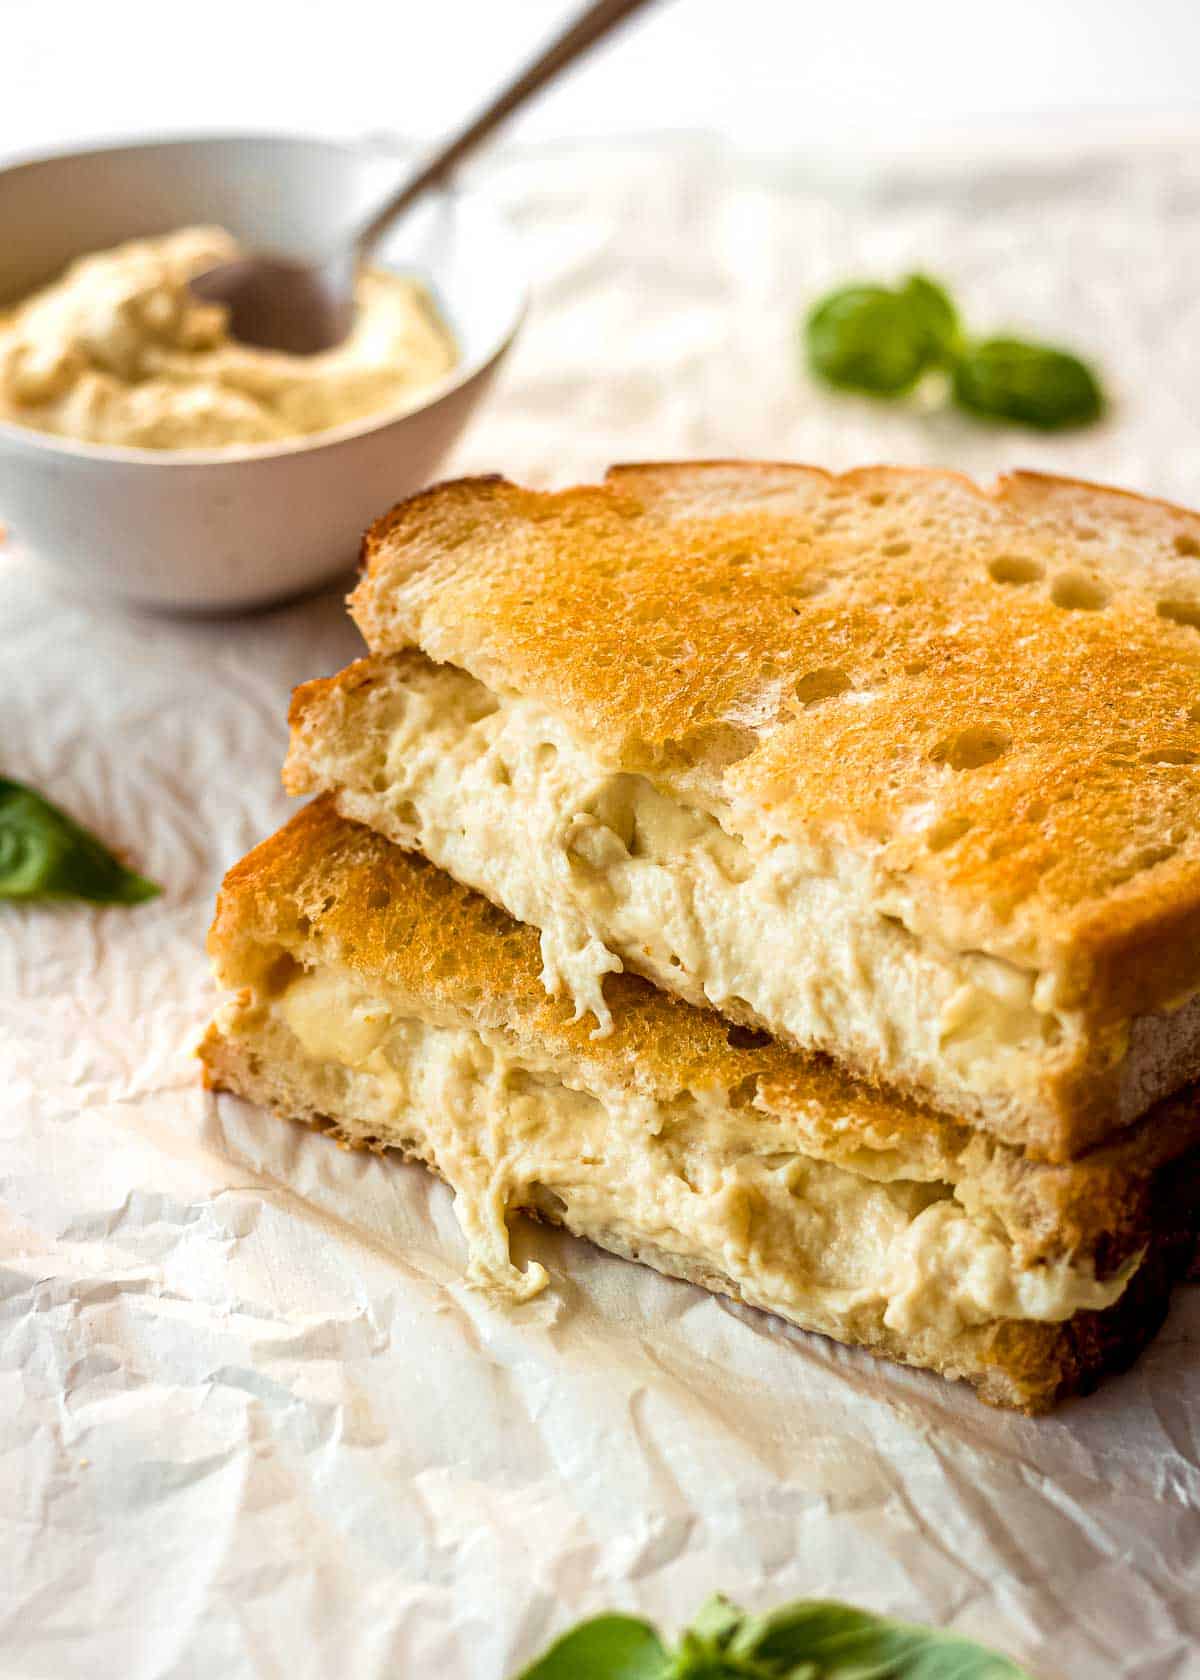 A grilled cheese sandwich made with cashew mozzarella, with a dish of the mozzarella in the background.